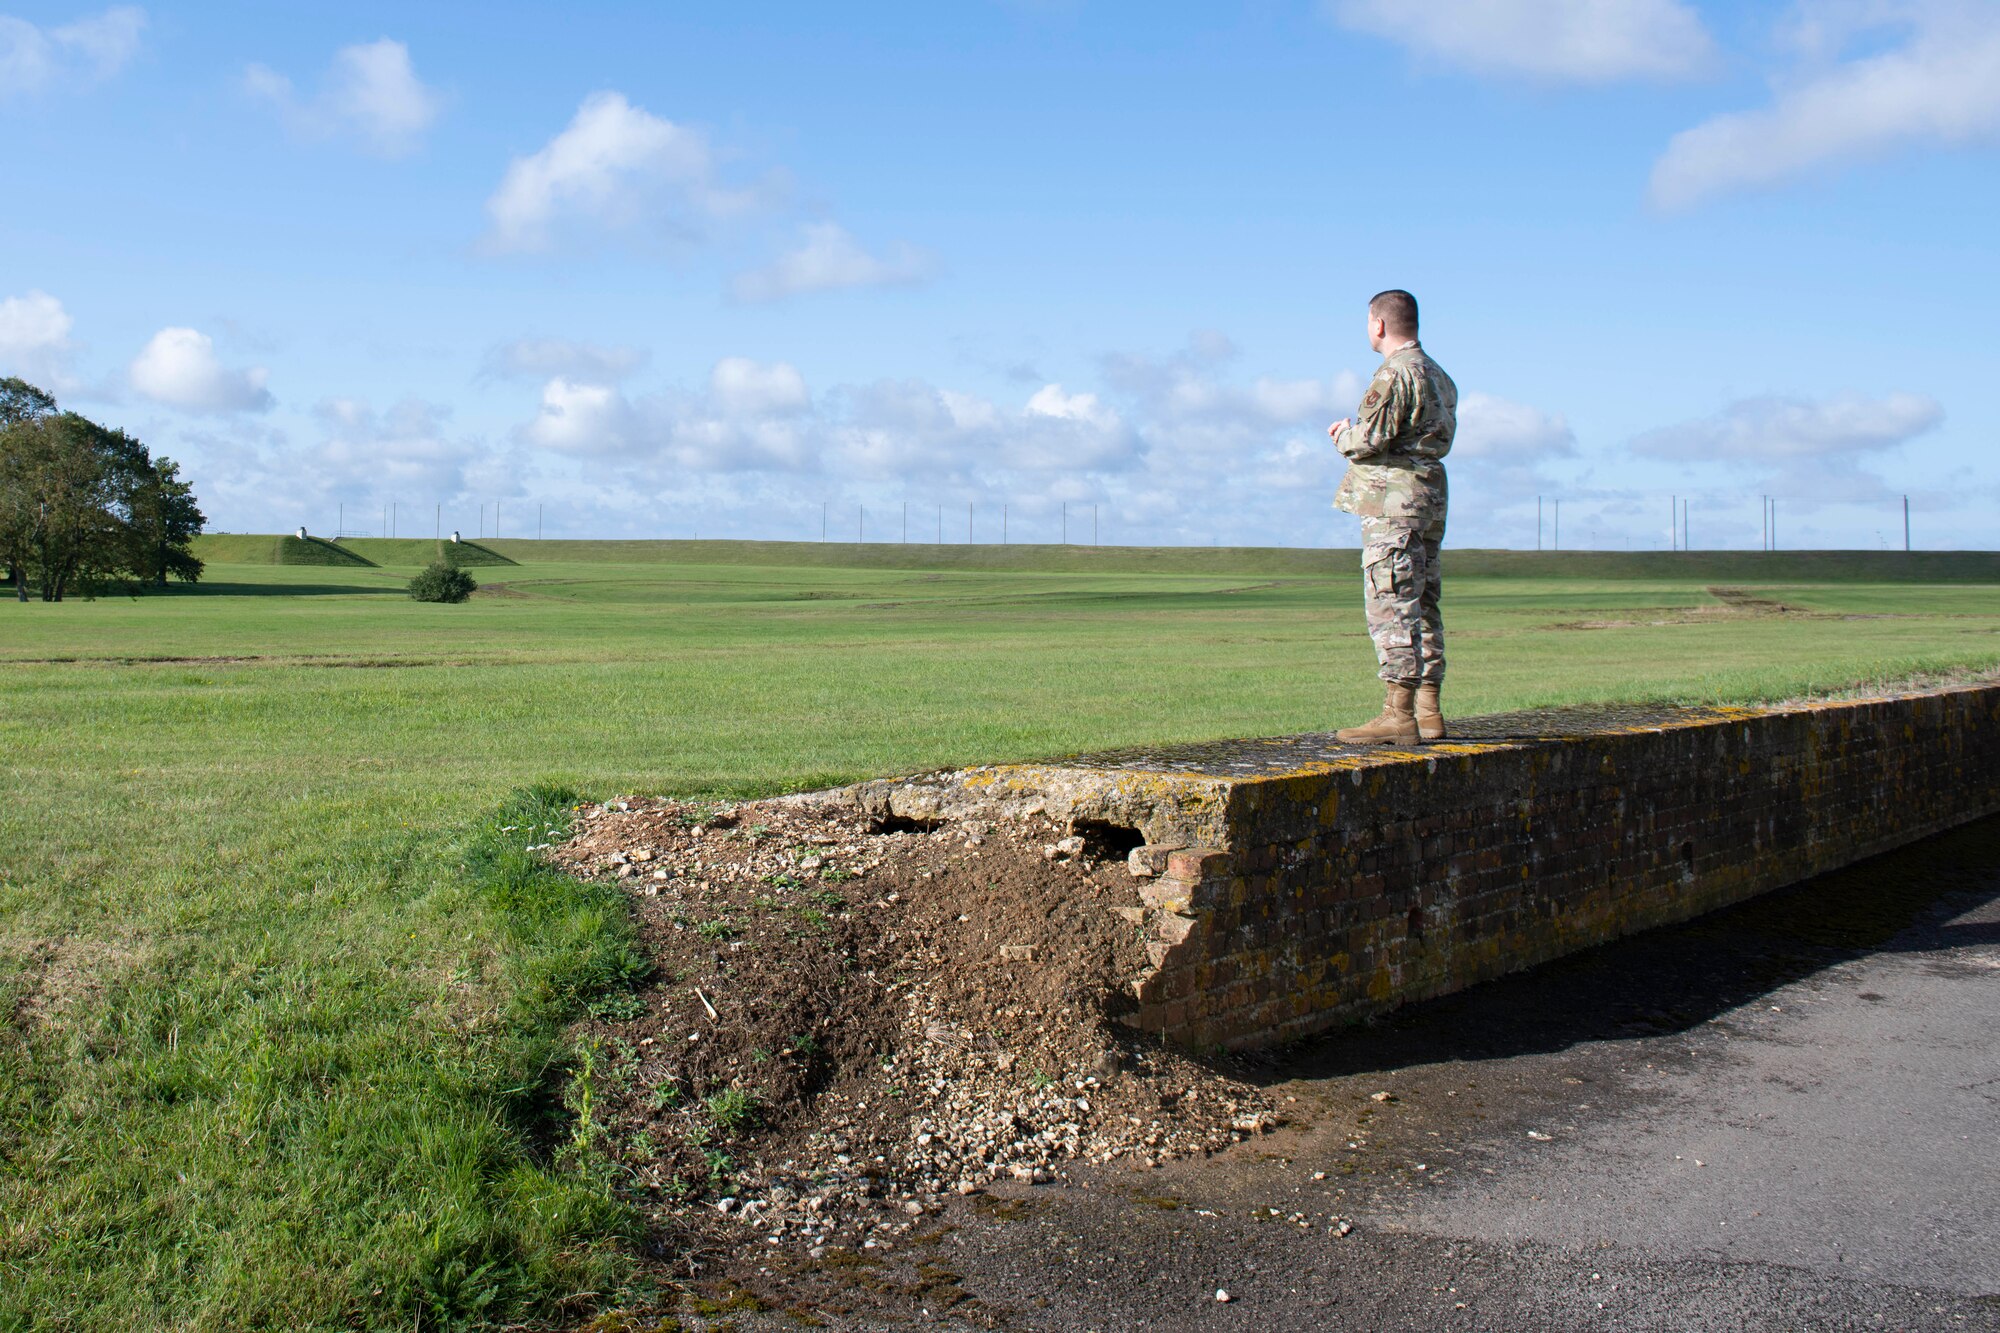 U.S. Air Force Col. Kurt Wendt, 501st Combat Support Wing commander, stands on the location where Gen. Dwight D. Eisenhower and Winston Churchill stood on June 5, 1944, before the 101st Airborne Division at the RAF Welford Park airfield, before taking off for Normandy in support of D Day. Wendt visited 420th MUNS to meet with the Airmen and to learn more about their new mission capabilities. (U.S. Air Force photo by Senior Airman Jennifer Zima)